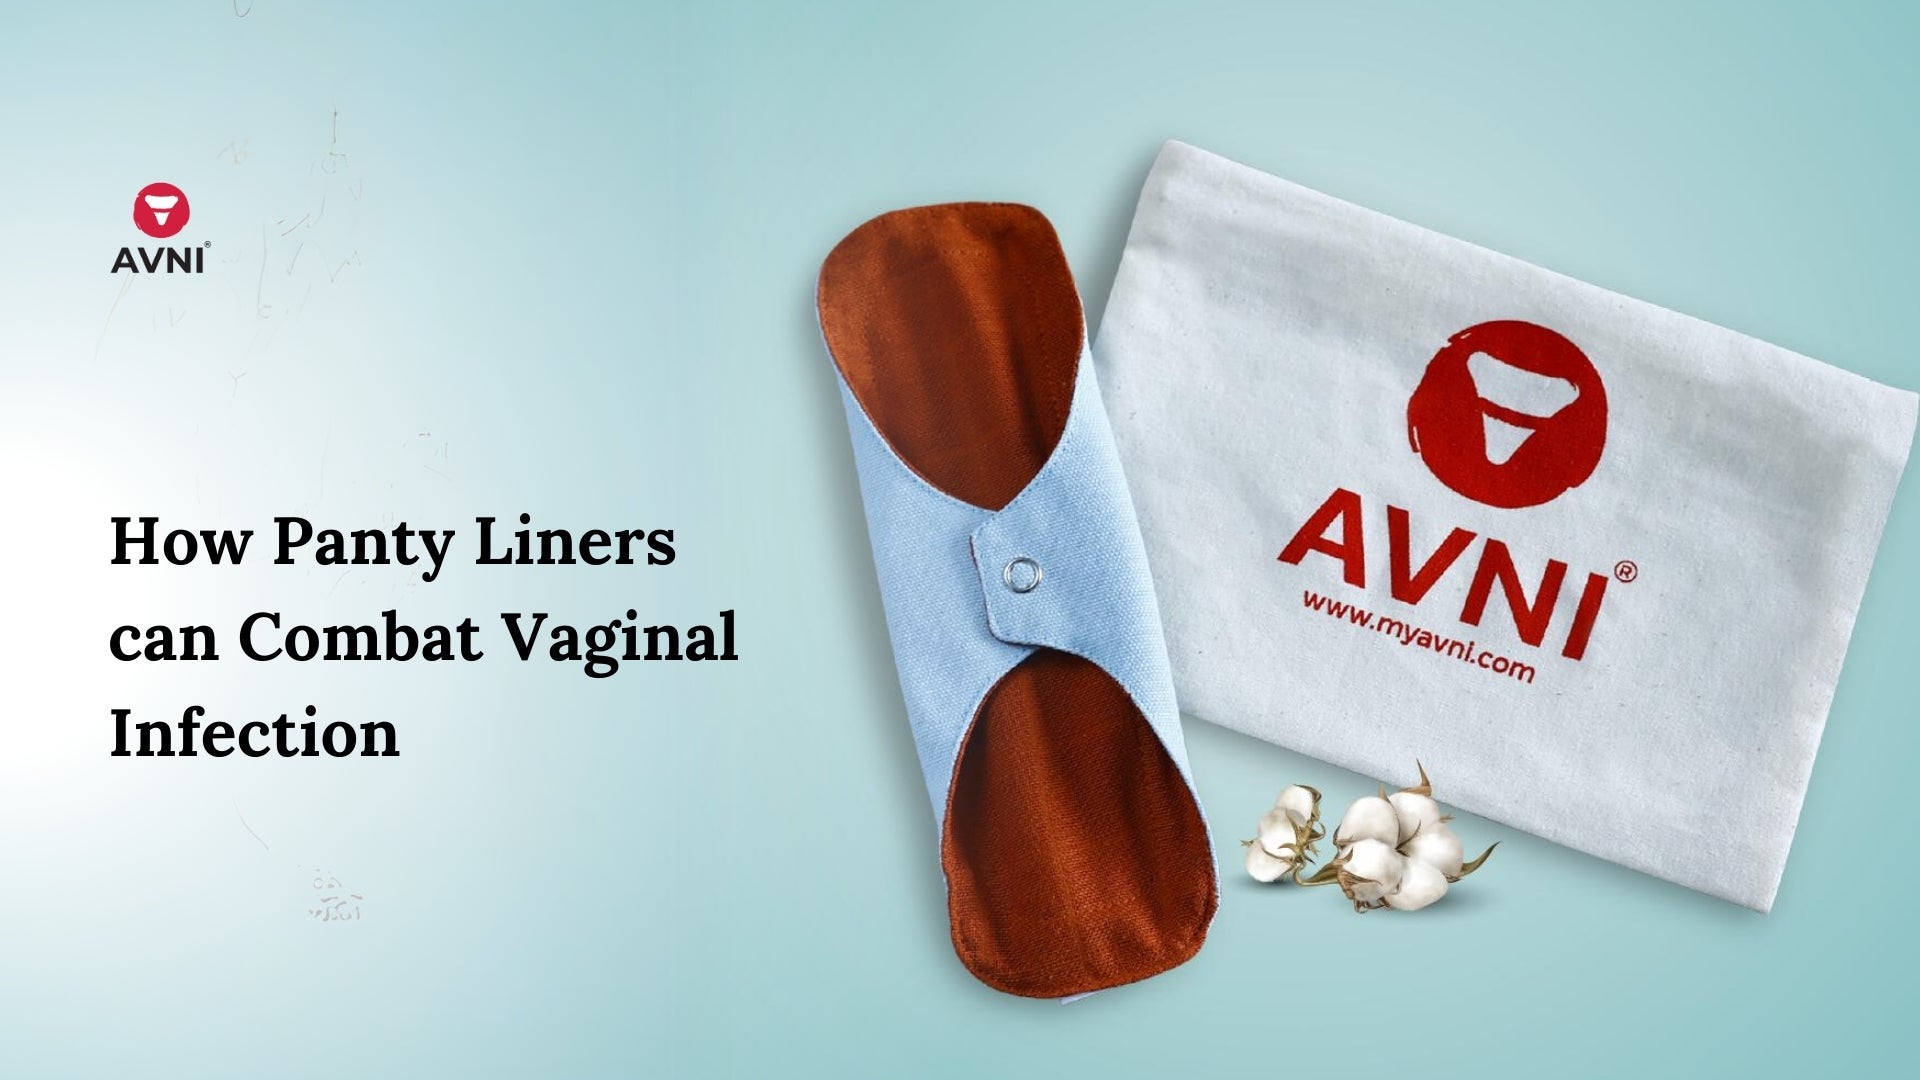 How Panty Liners can Combat Vaginal Infection